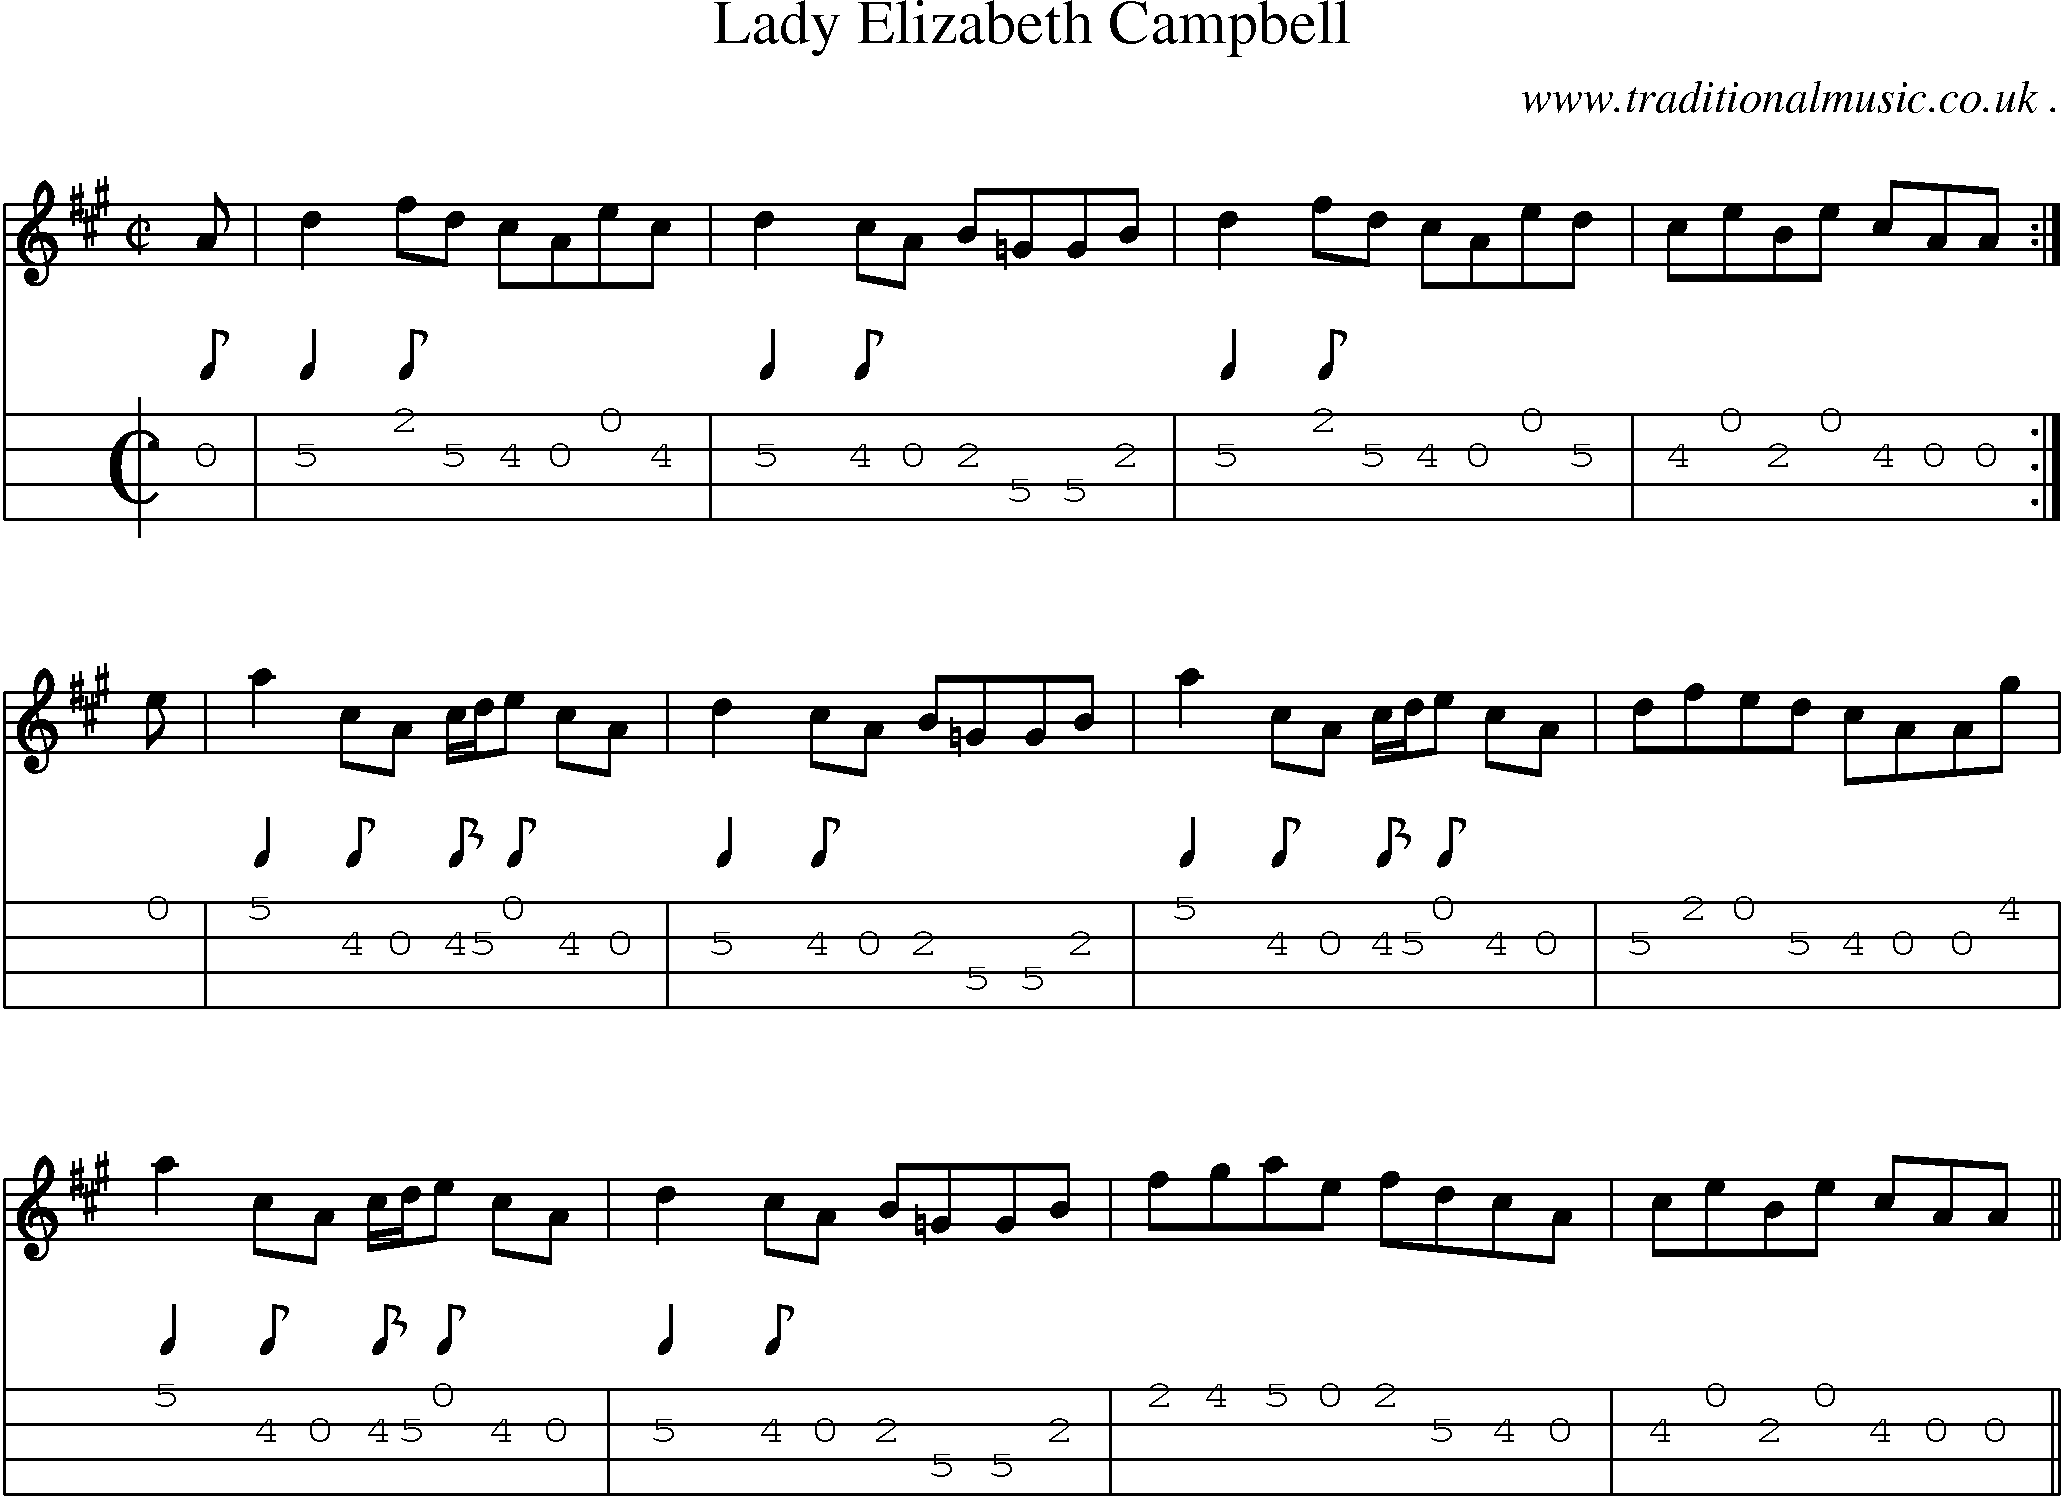 Sheet-music  score, Chords and Mandolin Tabs for Lady Elizabeth Campbell